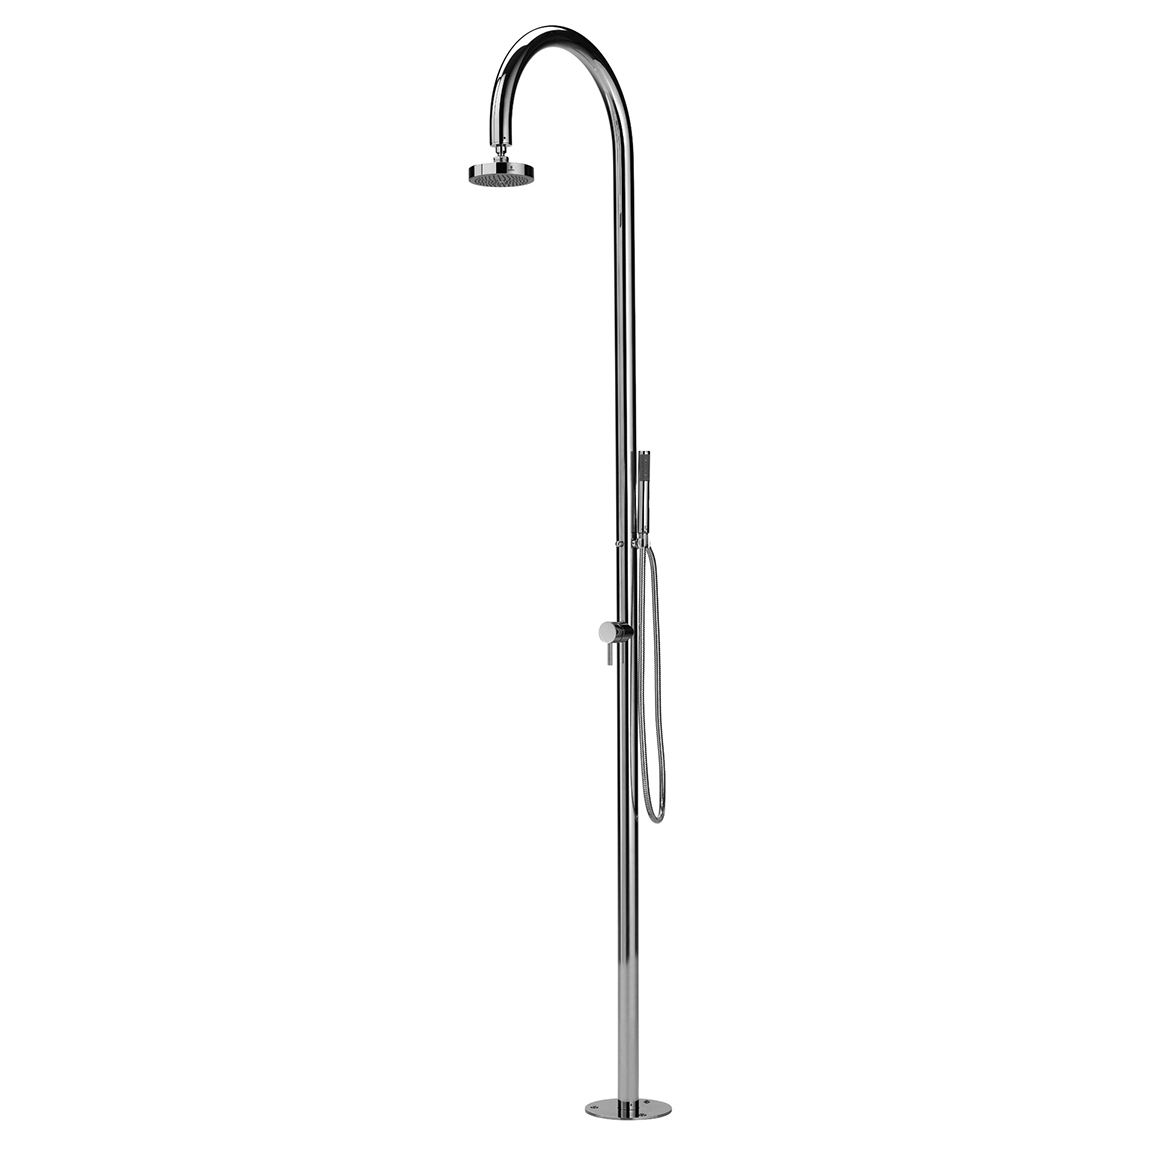 Origo C50 316 Marine Grade Stainless Steel Free Standing Hot and Cold Shower Column with Hand Spray